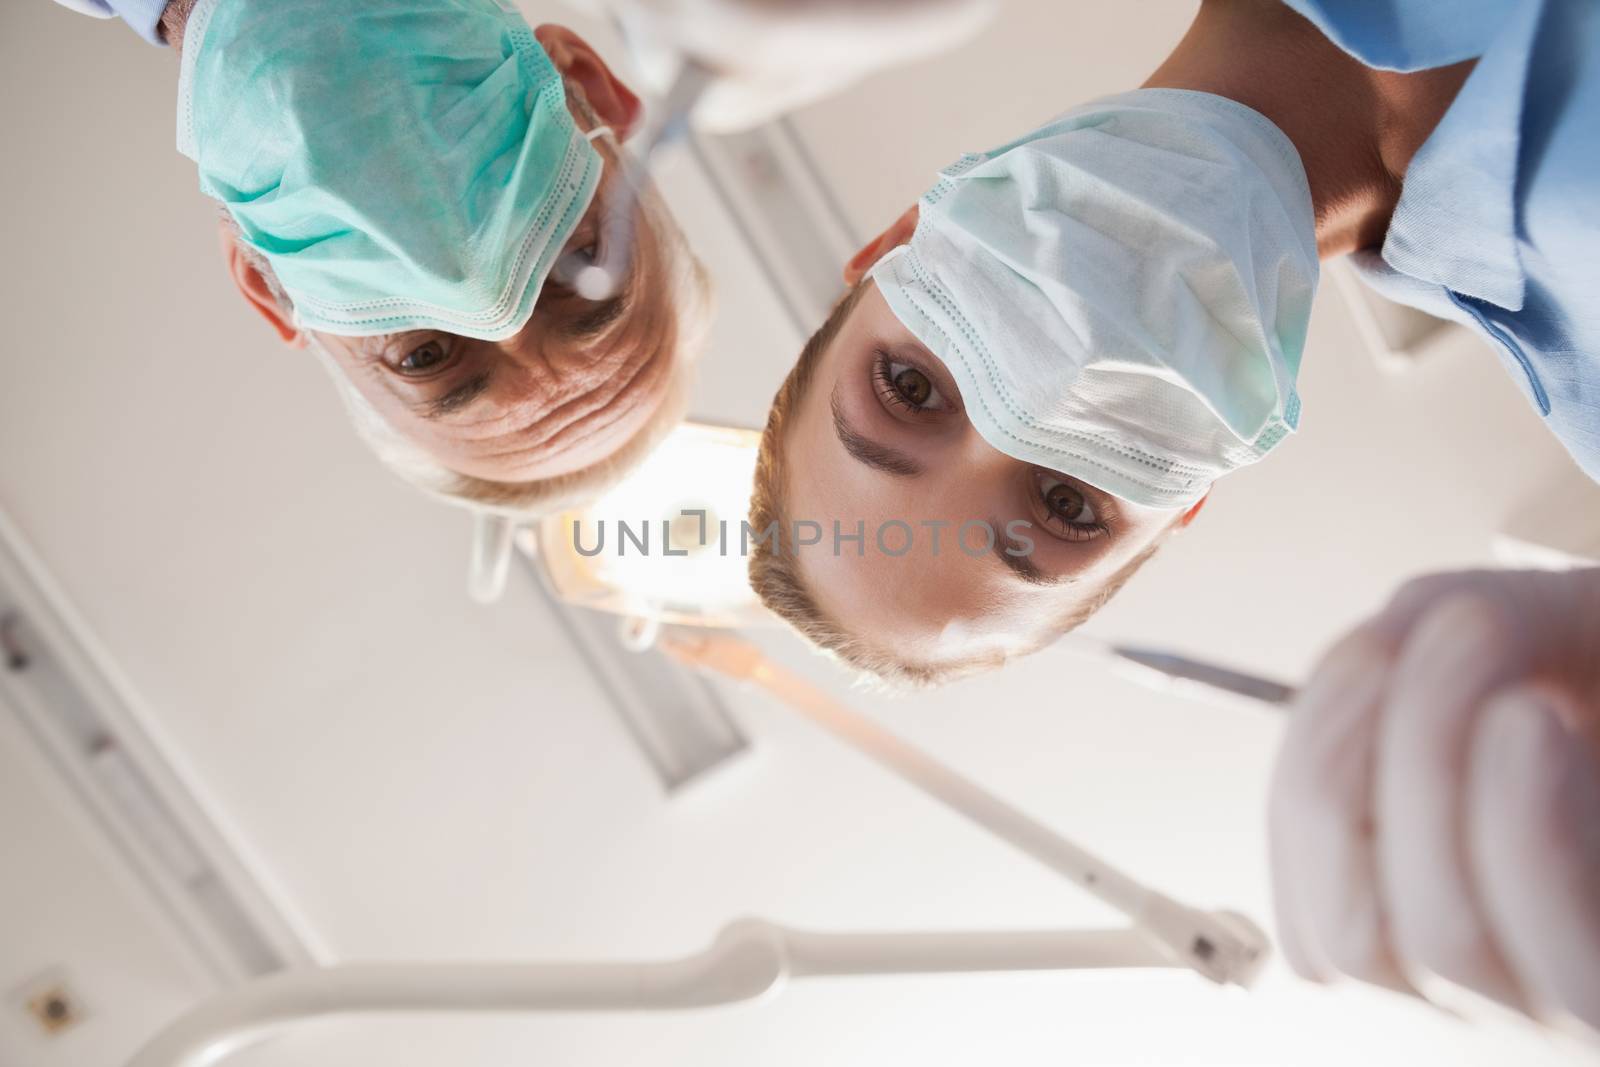 Dentist and assistant leaning over patient at the dental clinic